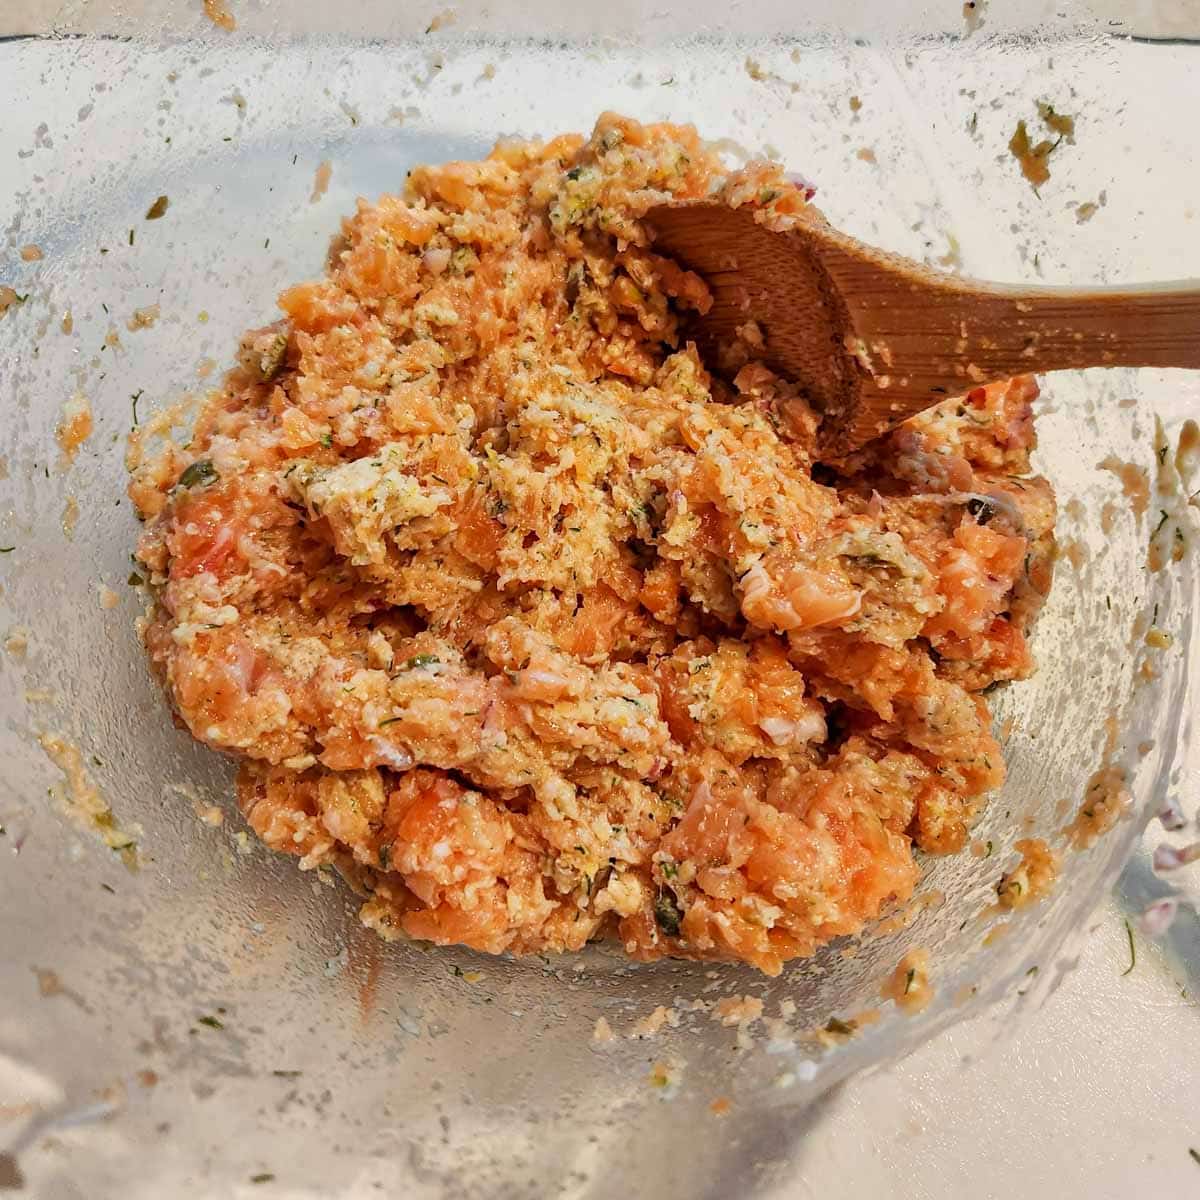 salmon patty mixture in a bowl